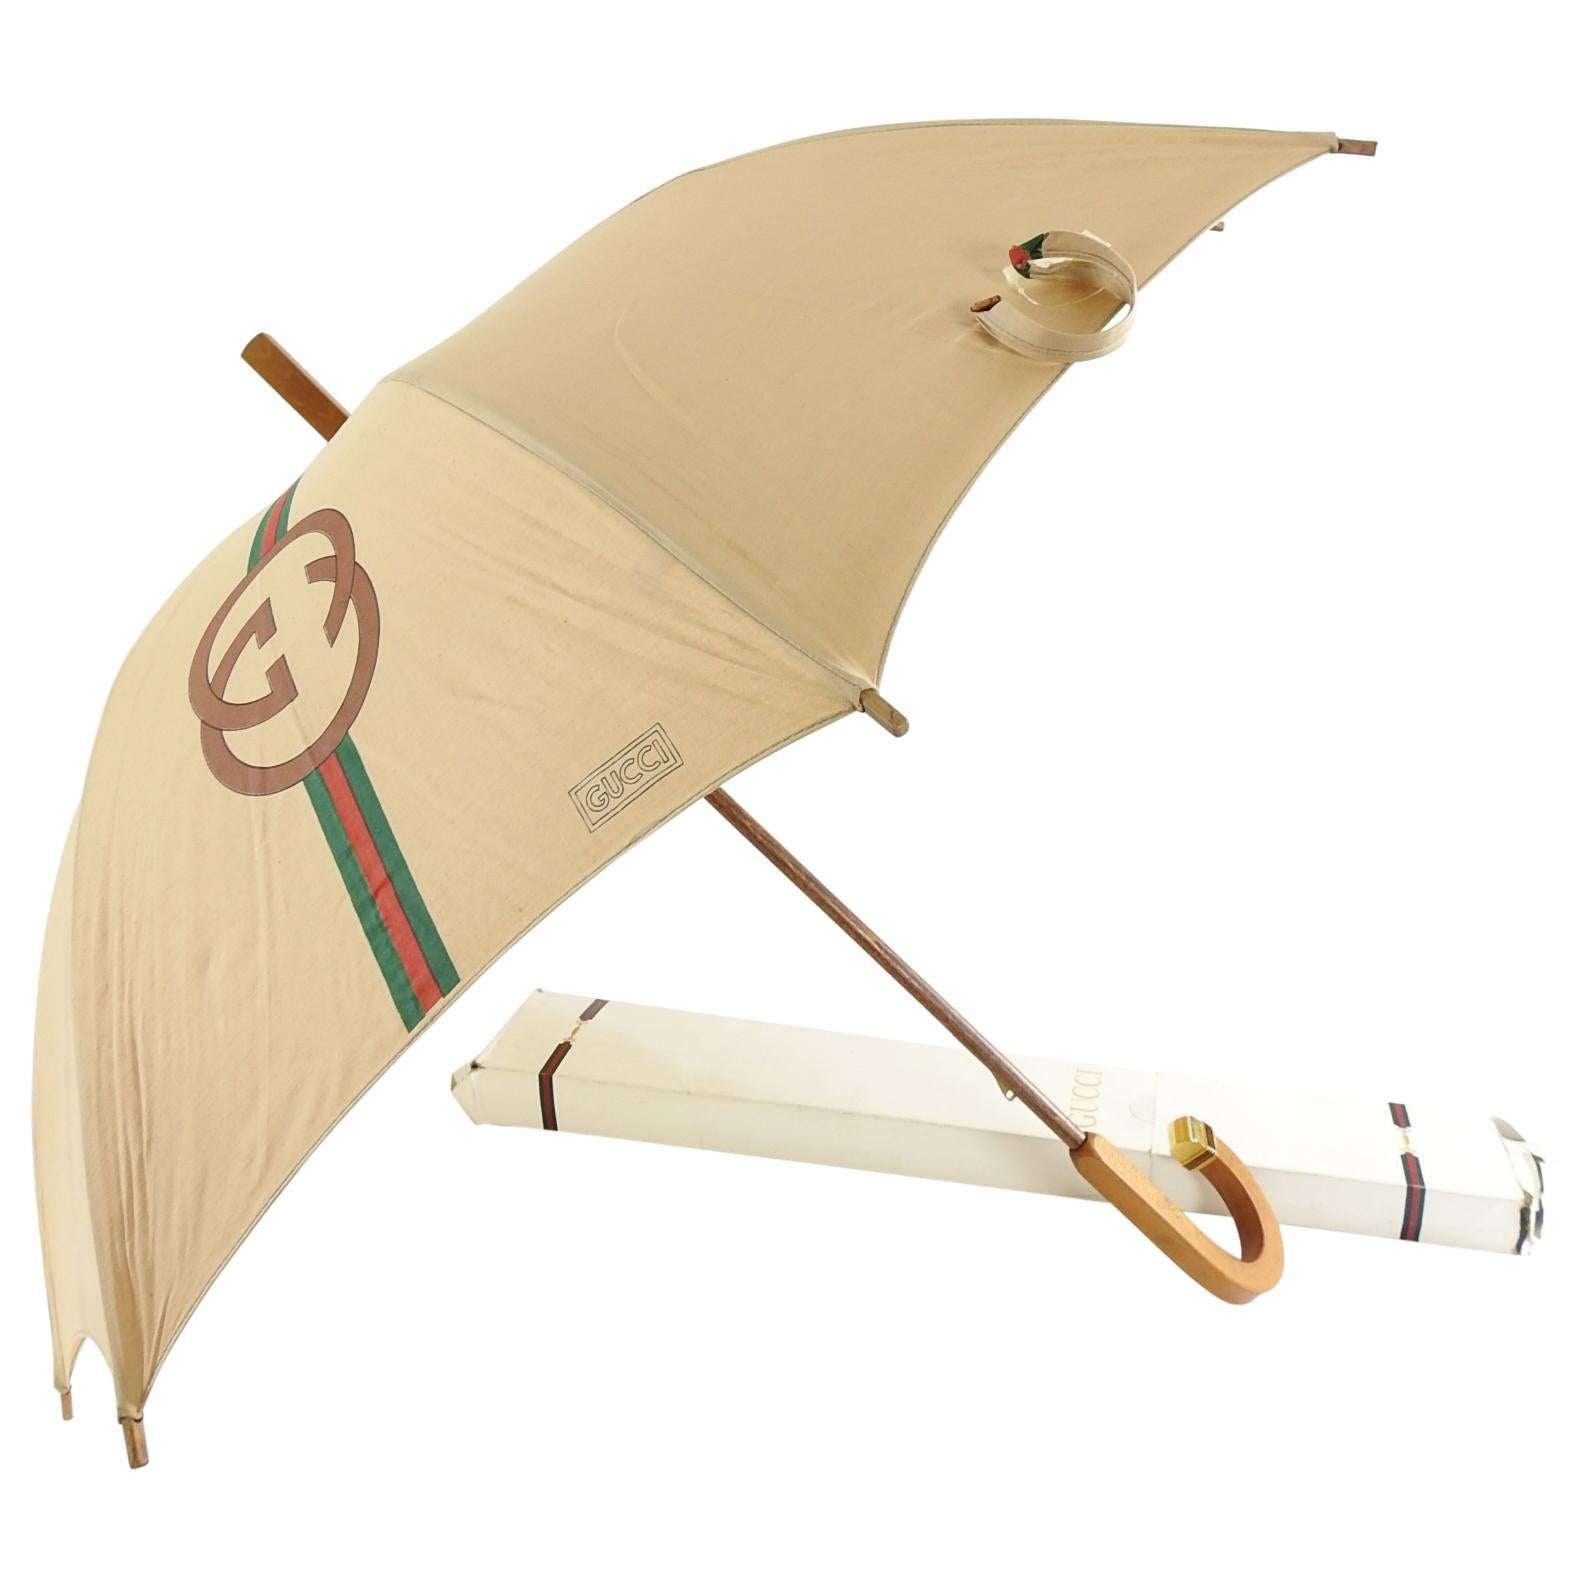 Gucci Vintage 1981 GG Logo Wood Handle Umbrella in box - New with Tags 6